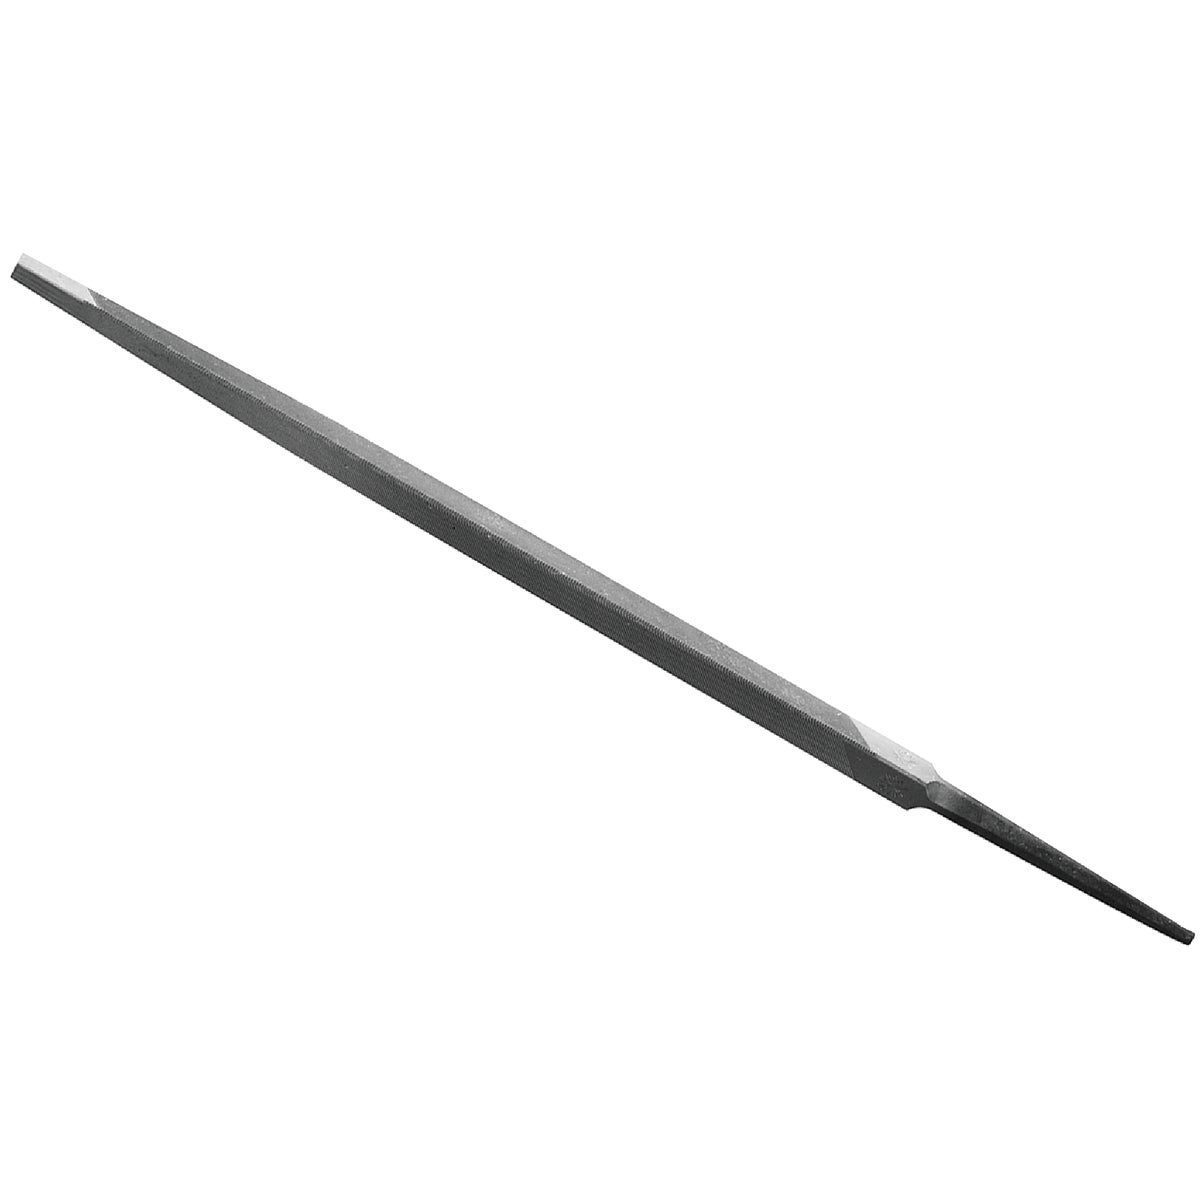 Nicholson 7 In. Slim Taper File without Handle (Bulk)